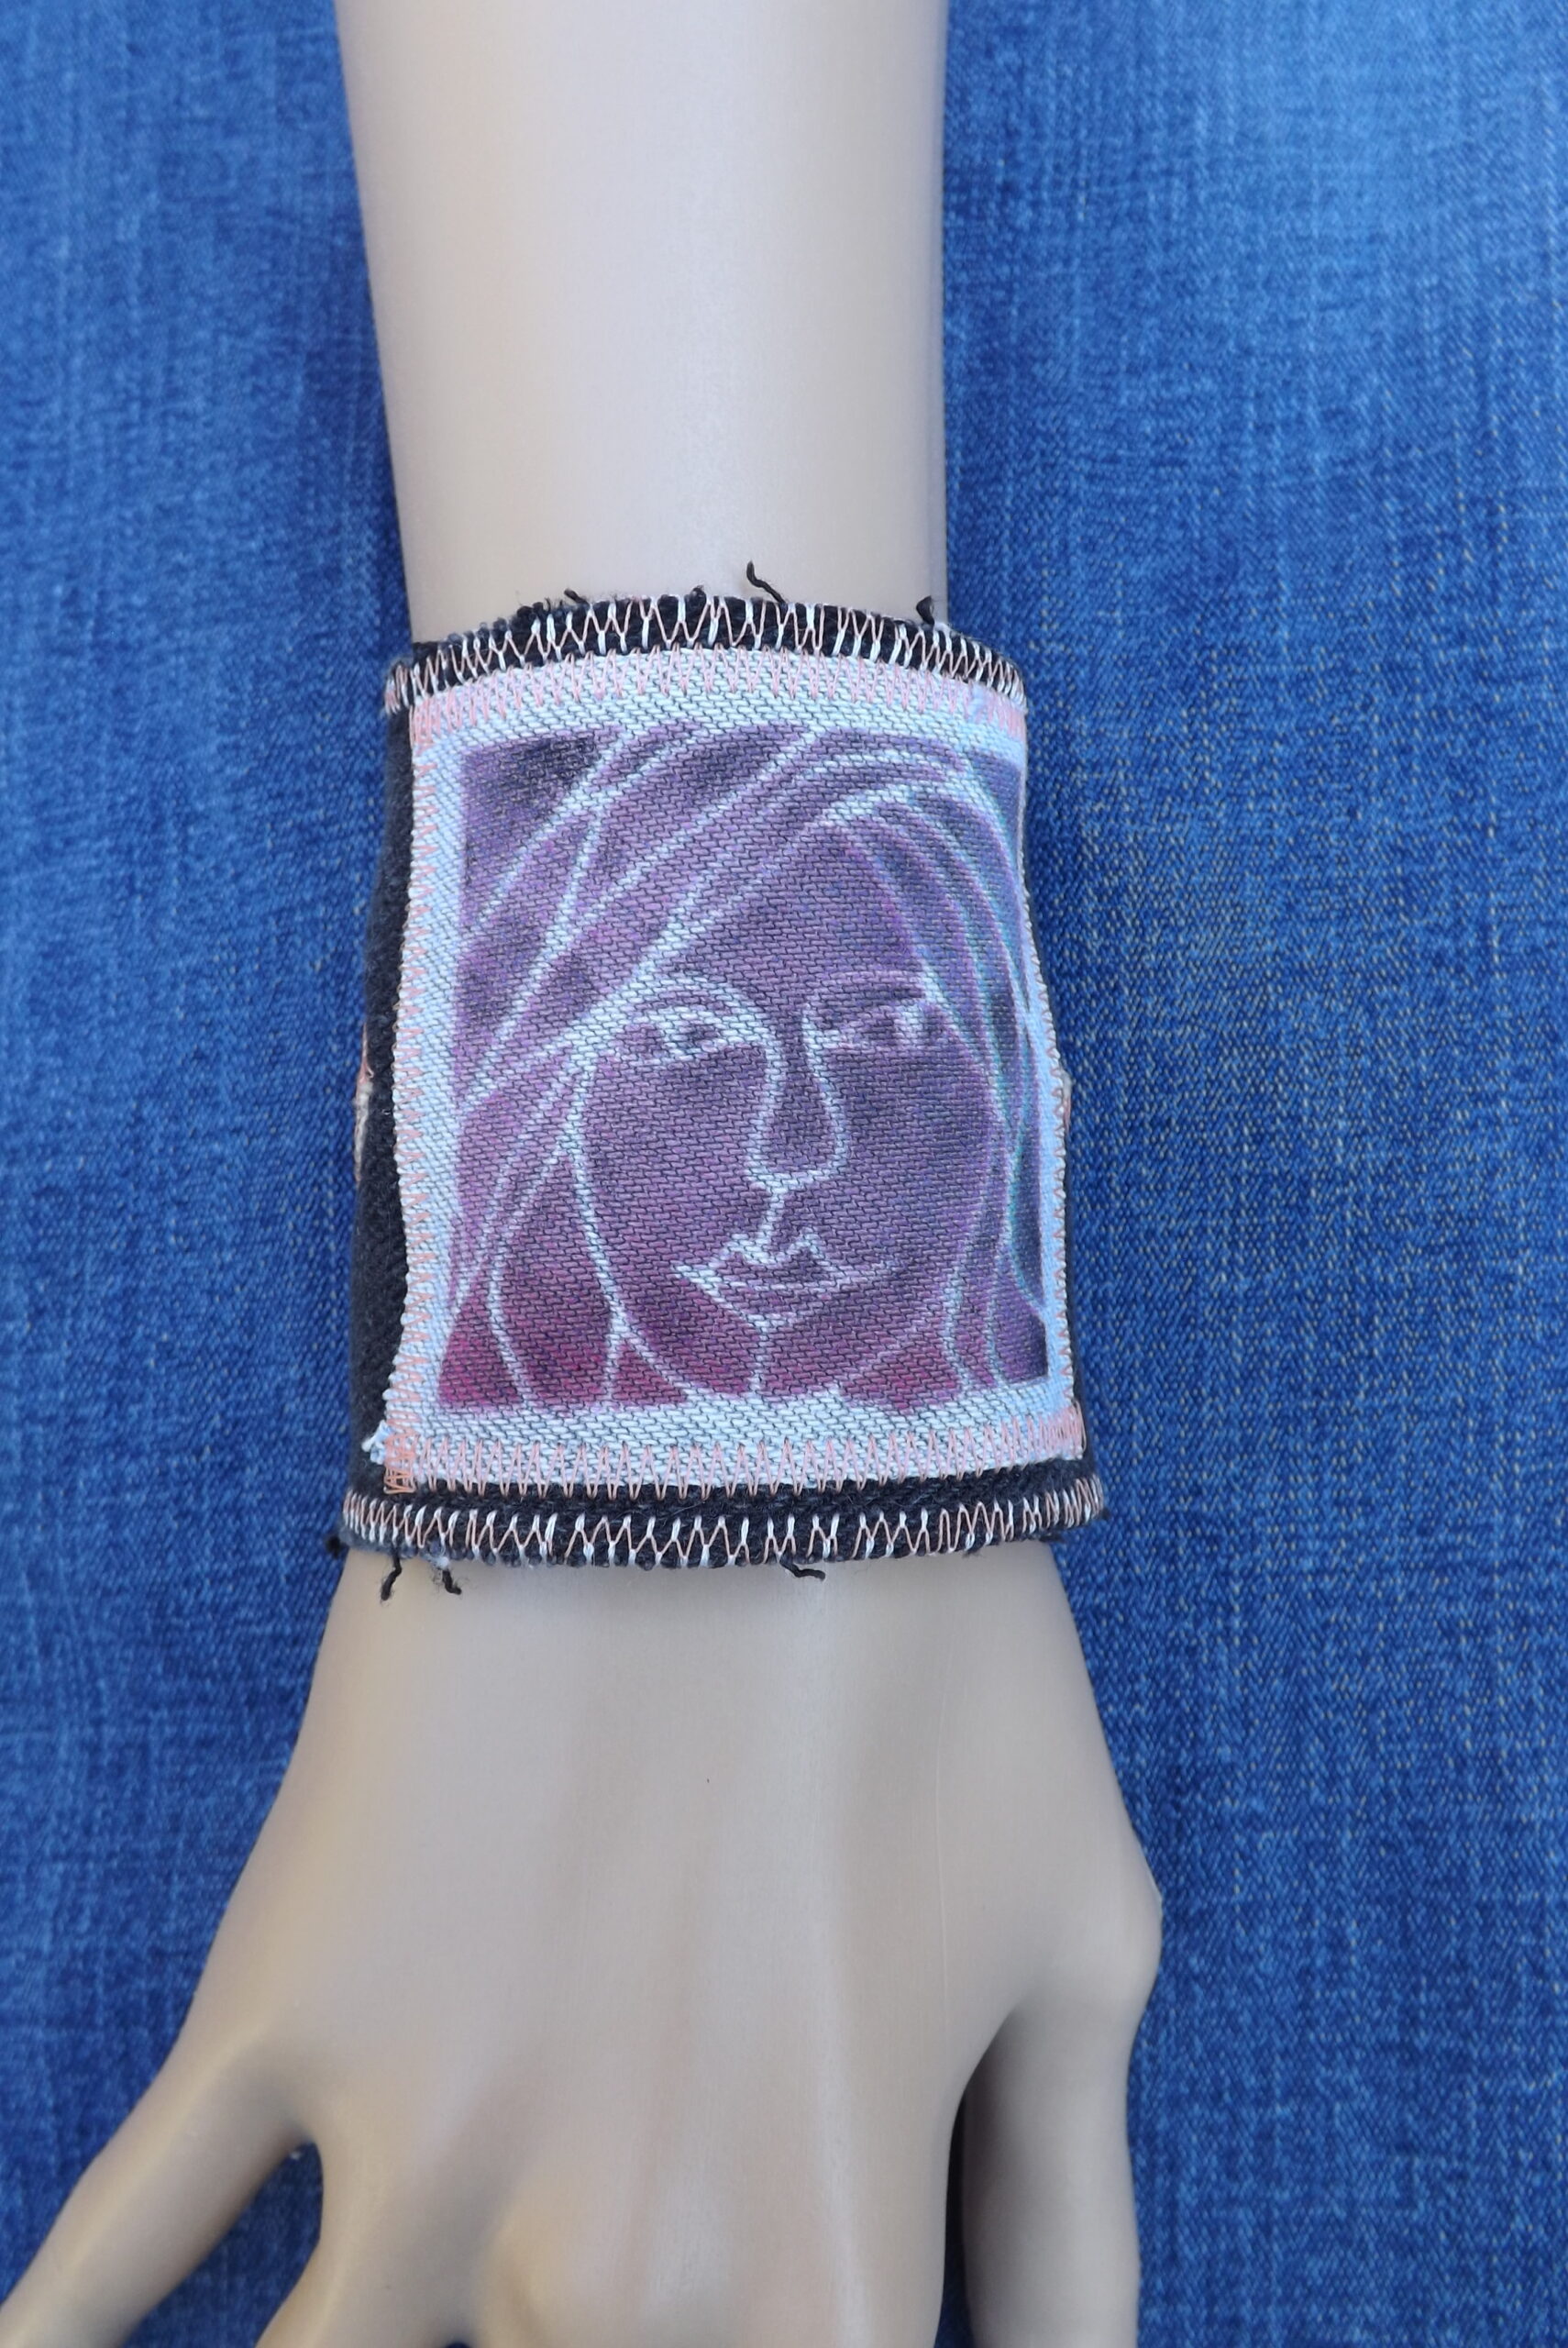 A woman's face adorns an upcycled denim cuff bracelet.